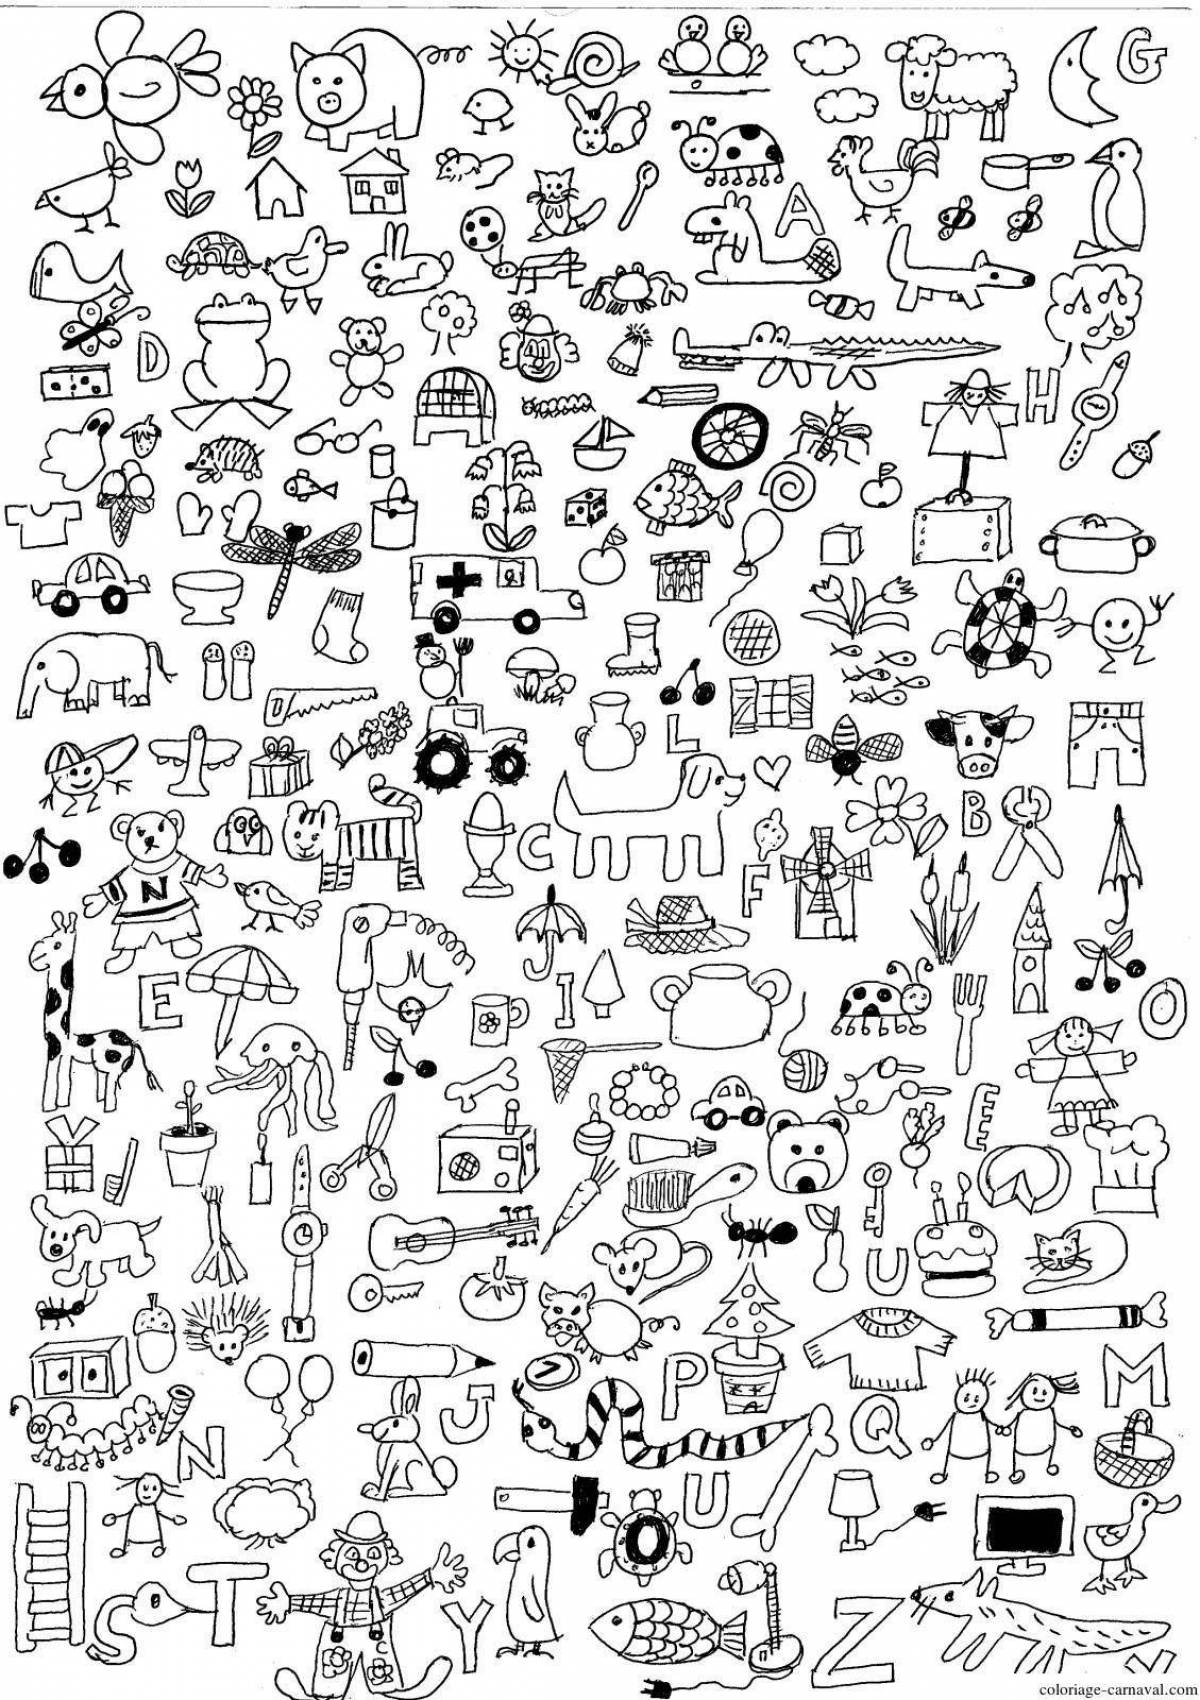 Colored stickers for coloring pages for children